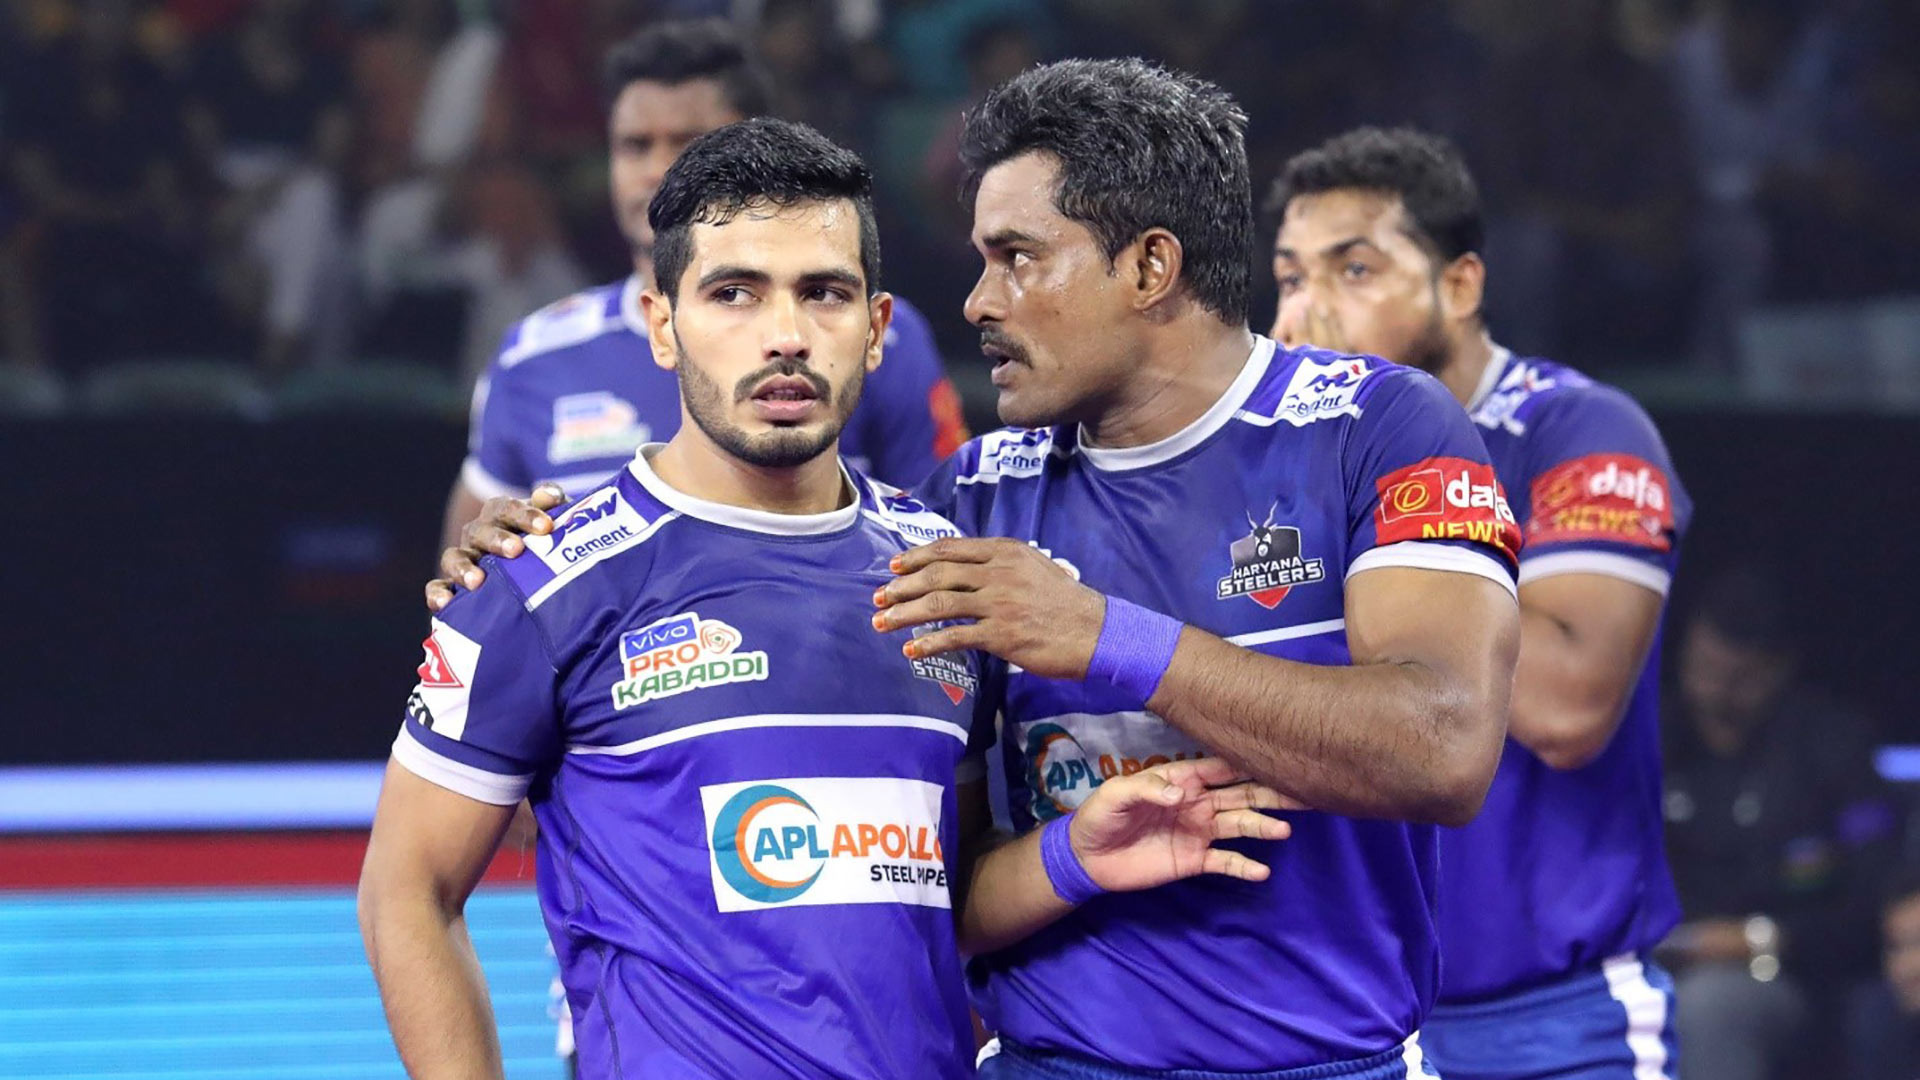 PKL 2019 | Fit after minor knee injury, Dharmaraj Cheralathan confident to lead Haryana Steelers to glory in home leg